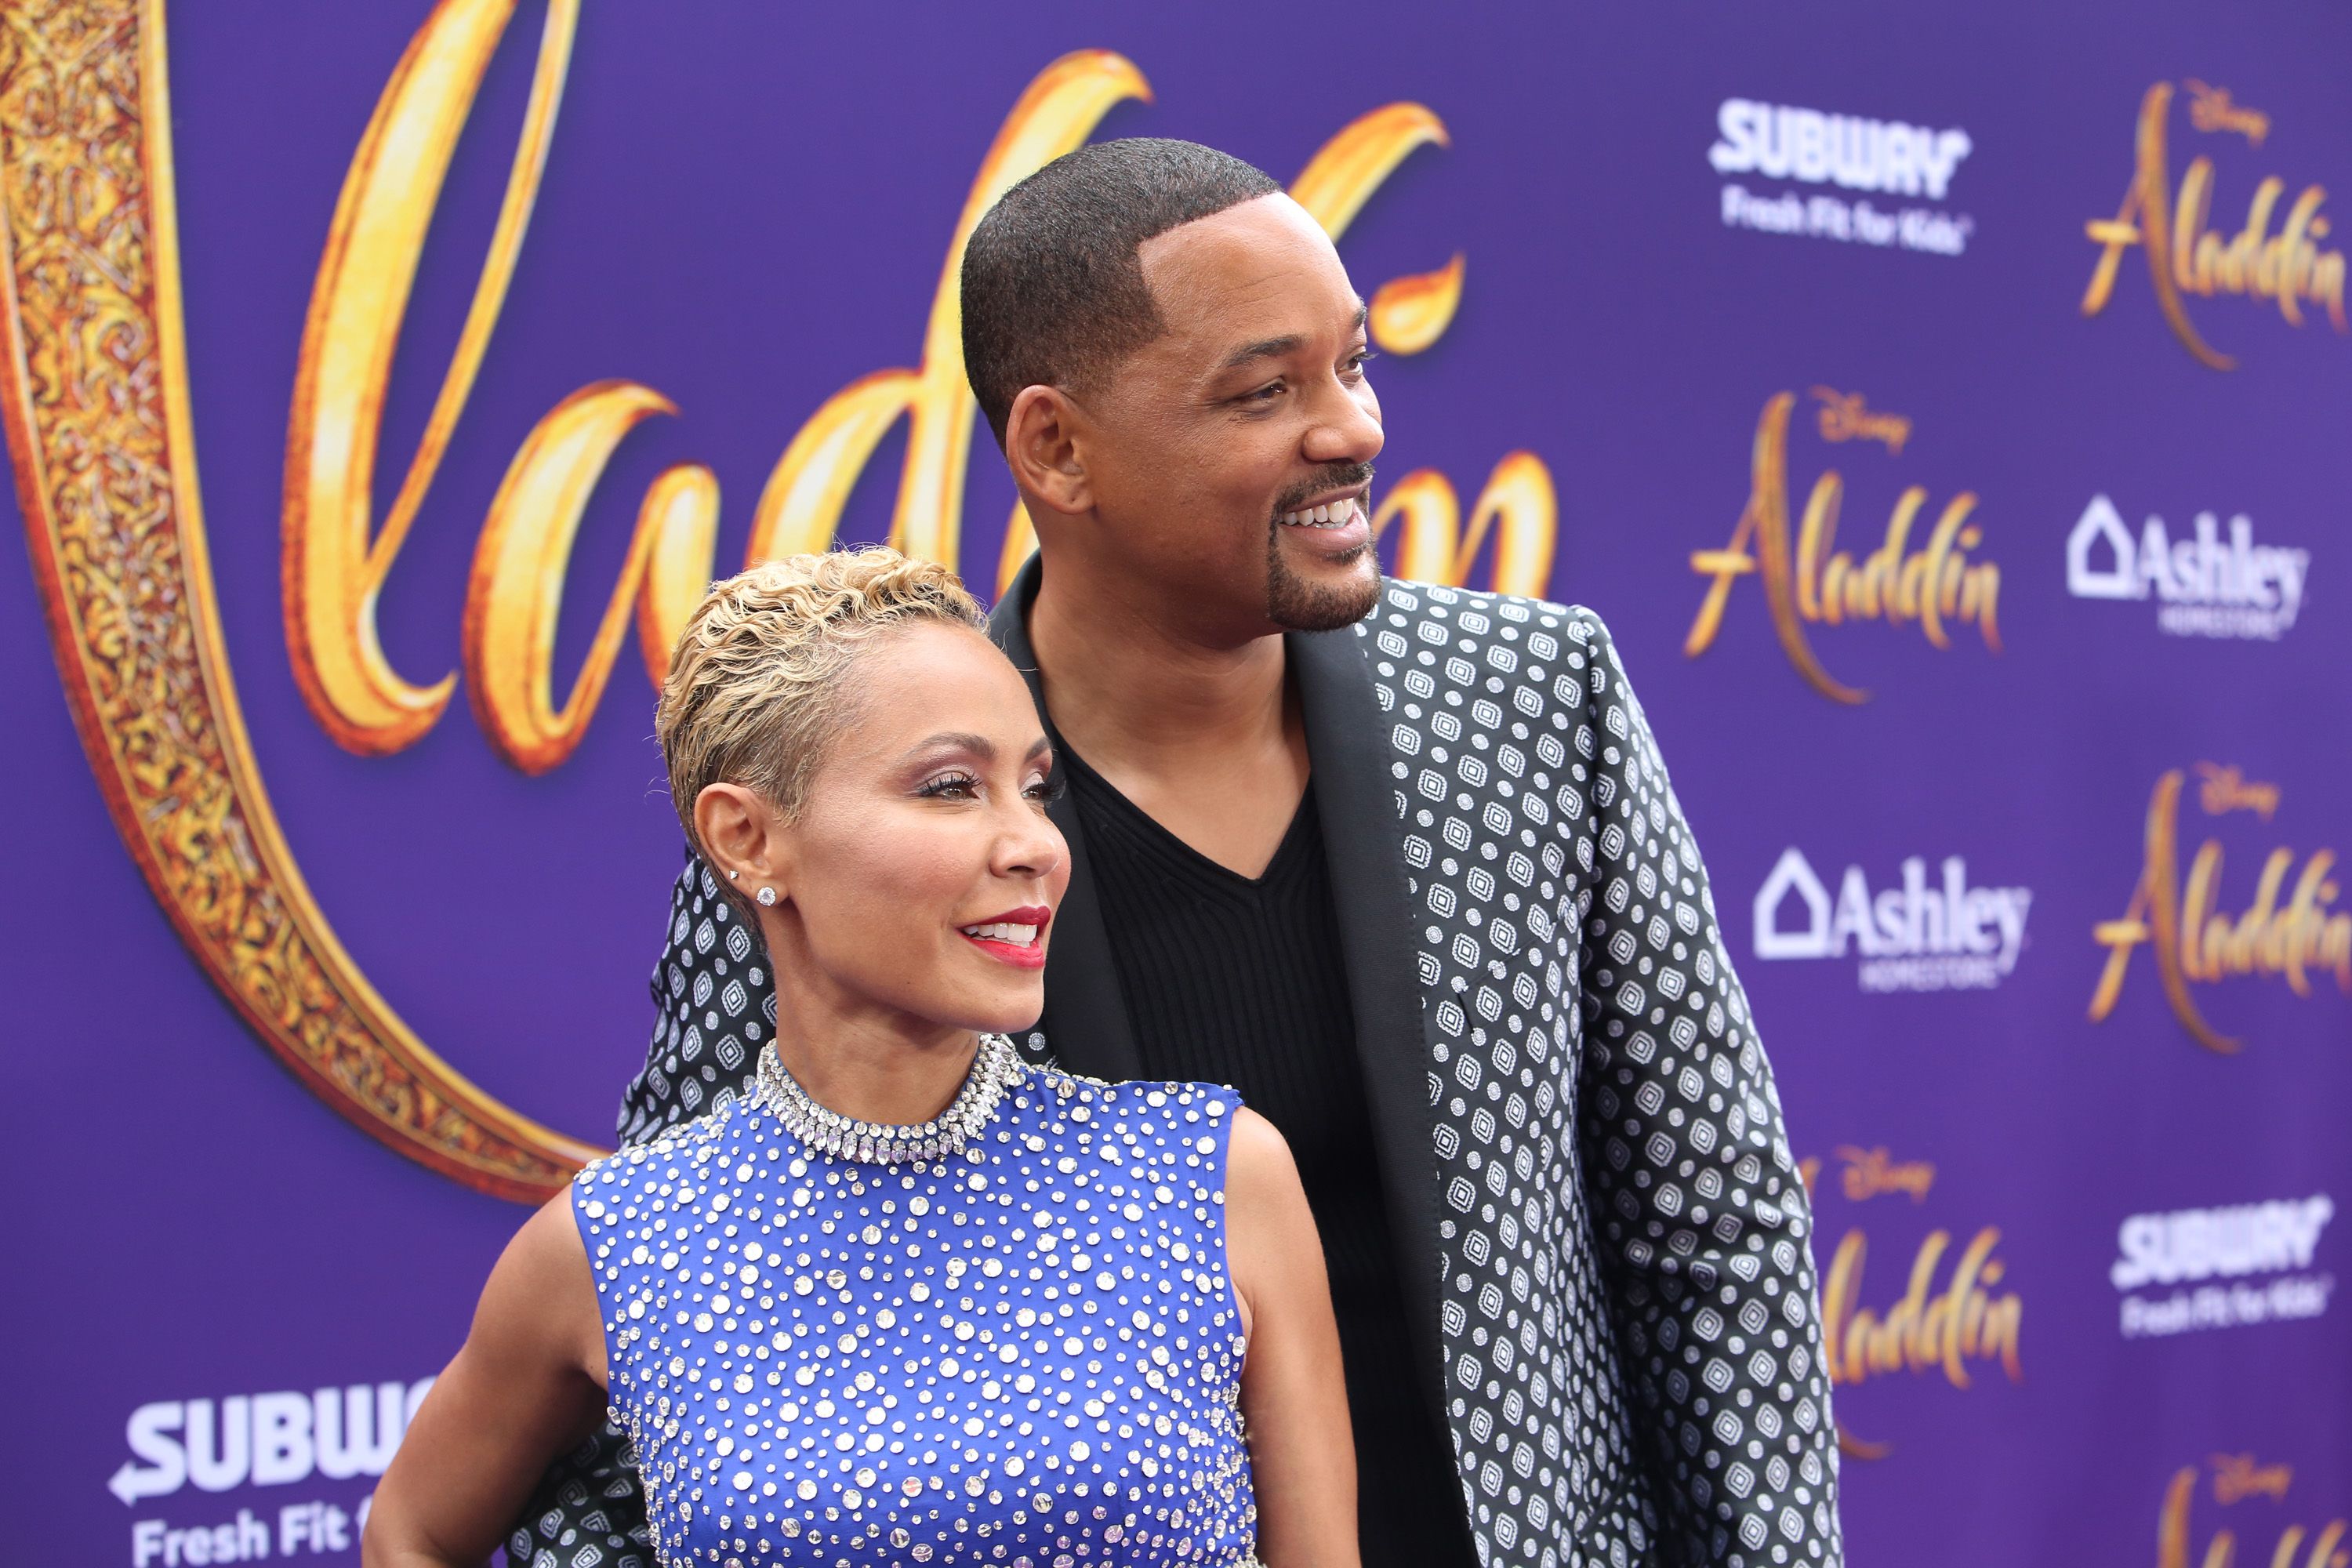 Jada Pinkett Smith and Will Smith during the premiere of Disney's "Aladdin" at El Capitan Theatre on May 21, 2019, in Los Angeles, California. | Source: Getty Images